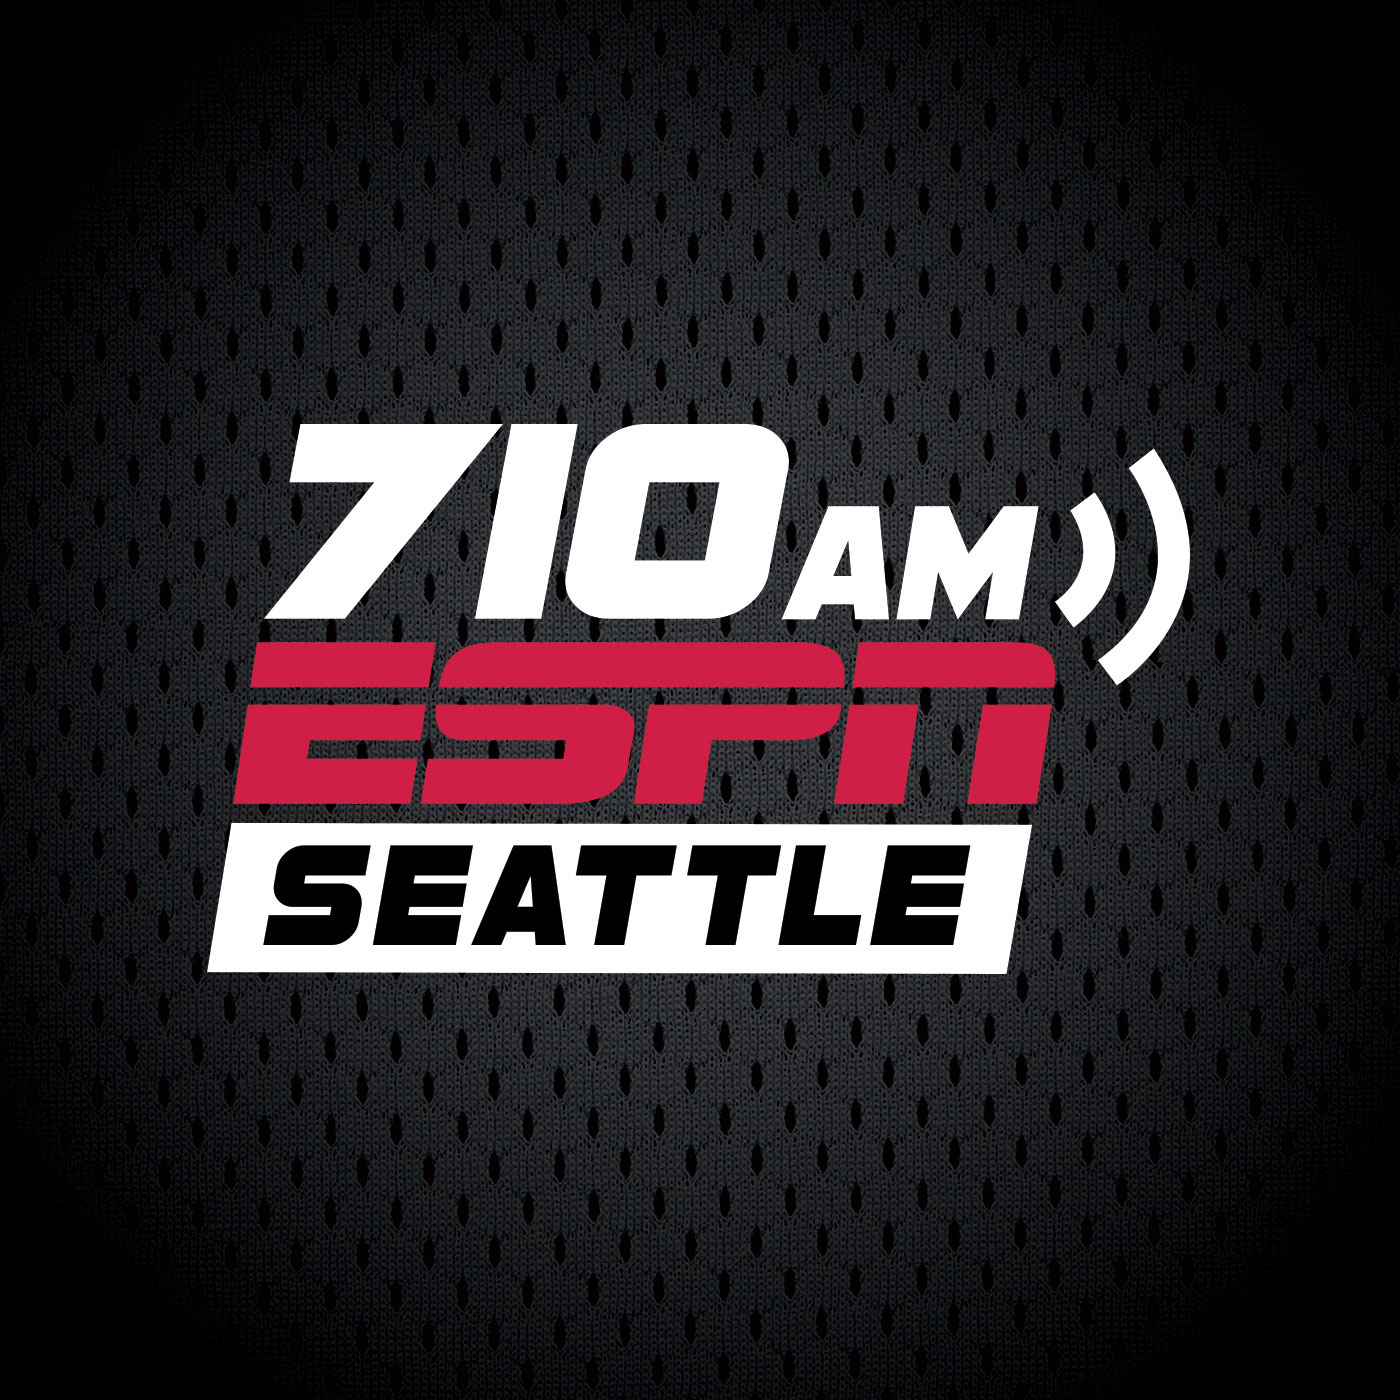 Hour 1 - What are we thankful for with the Seahawks this season?